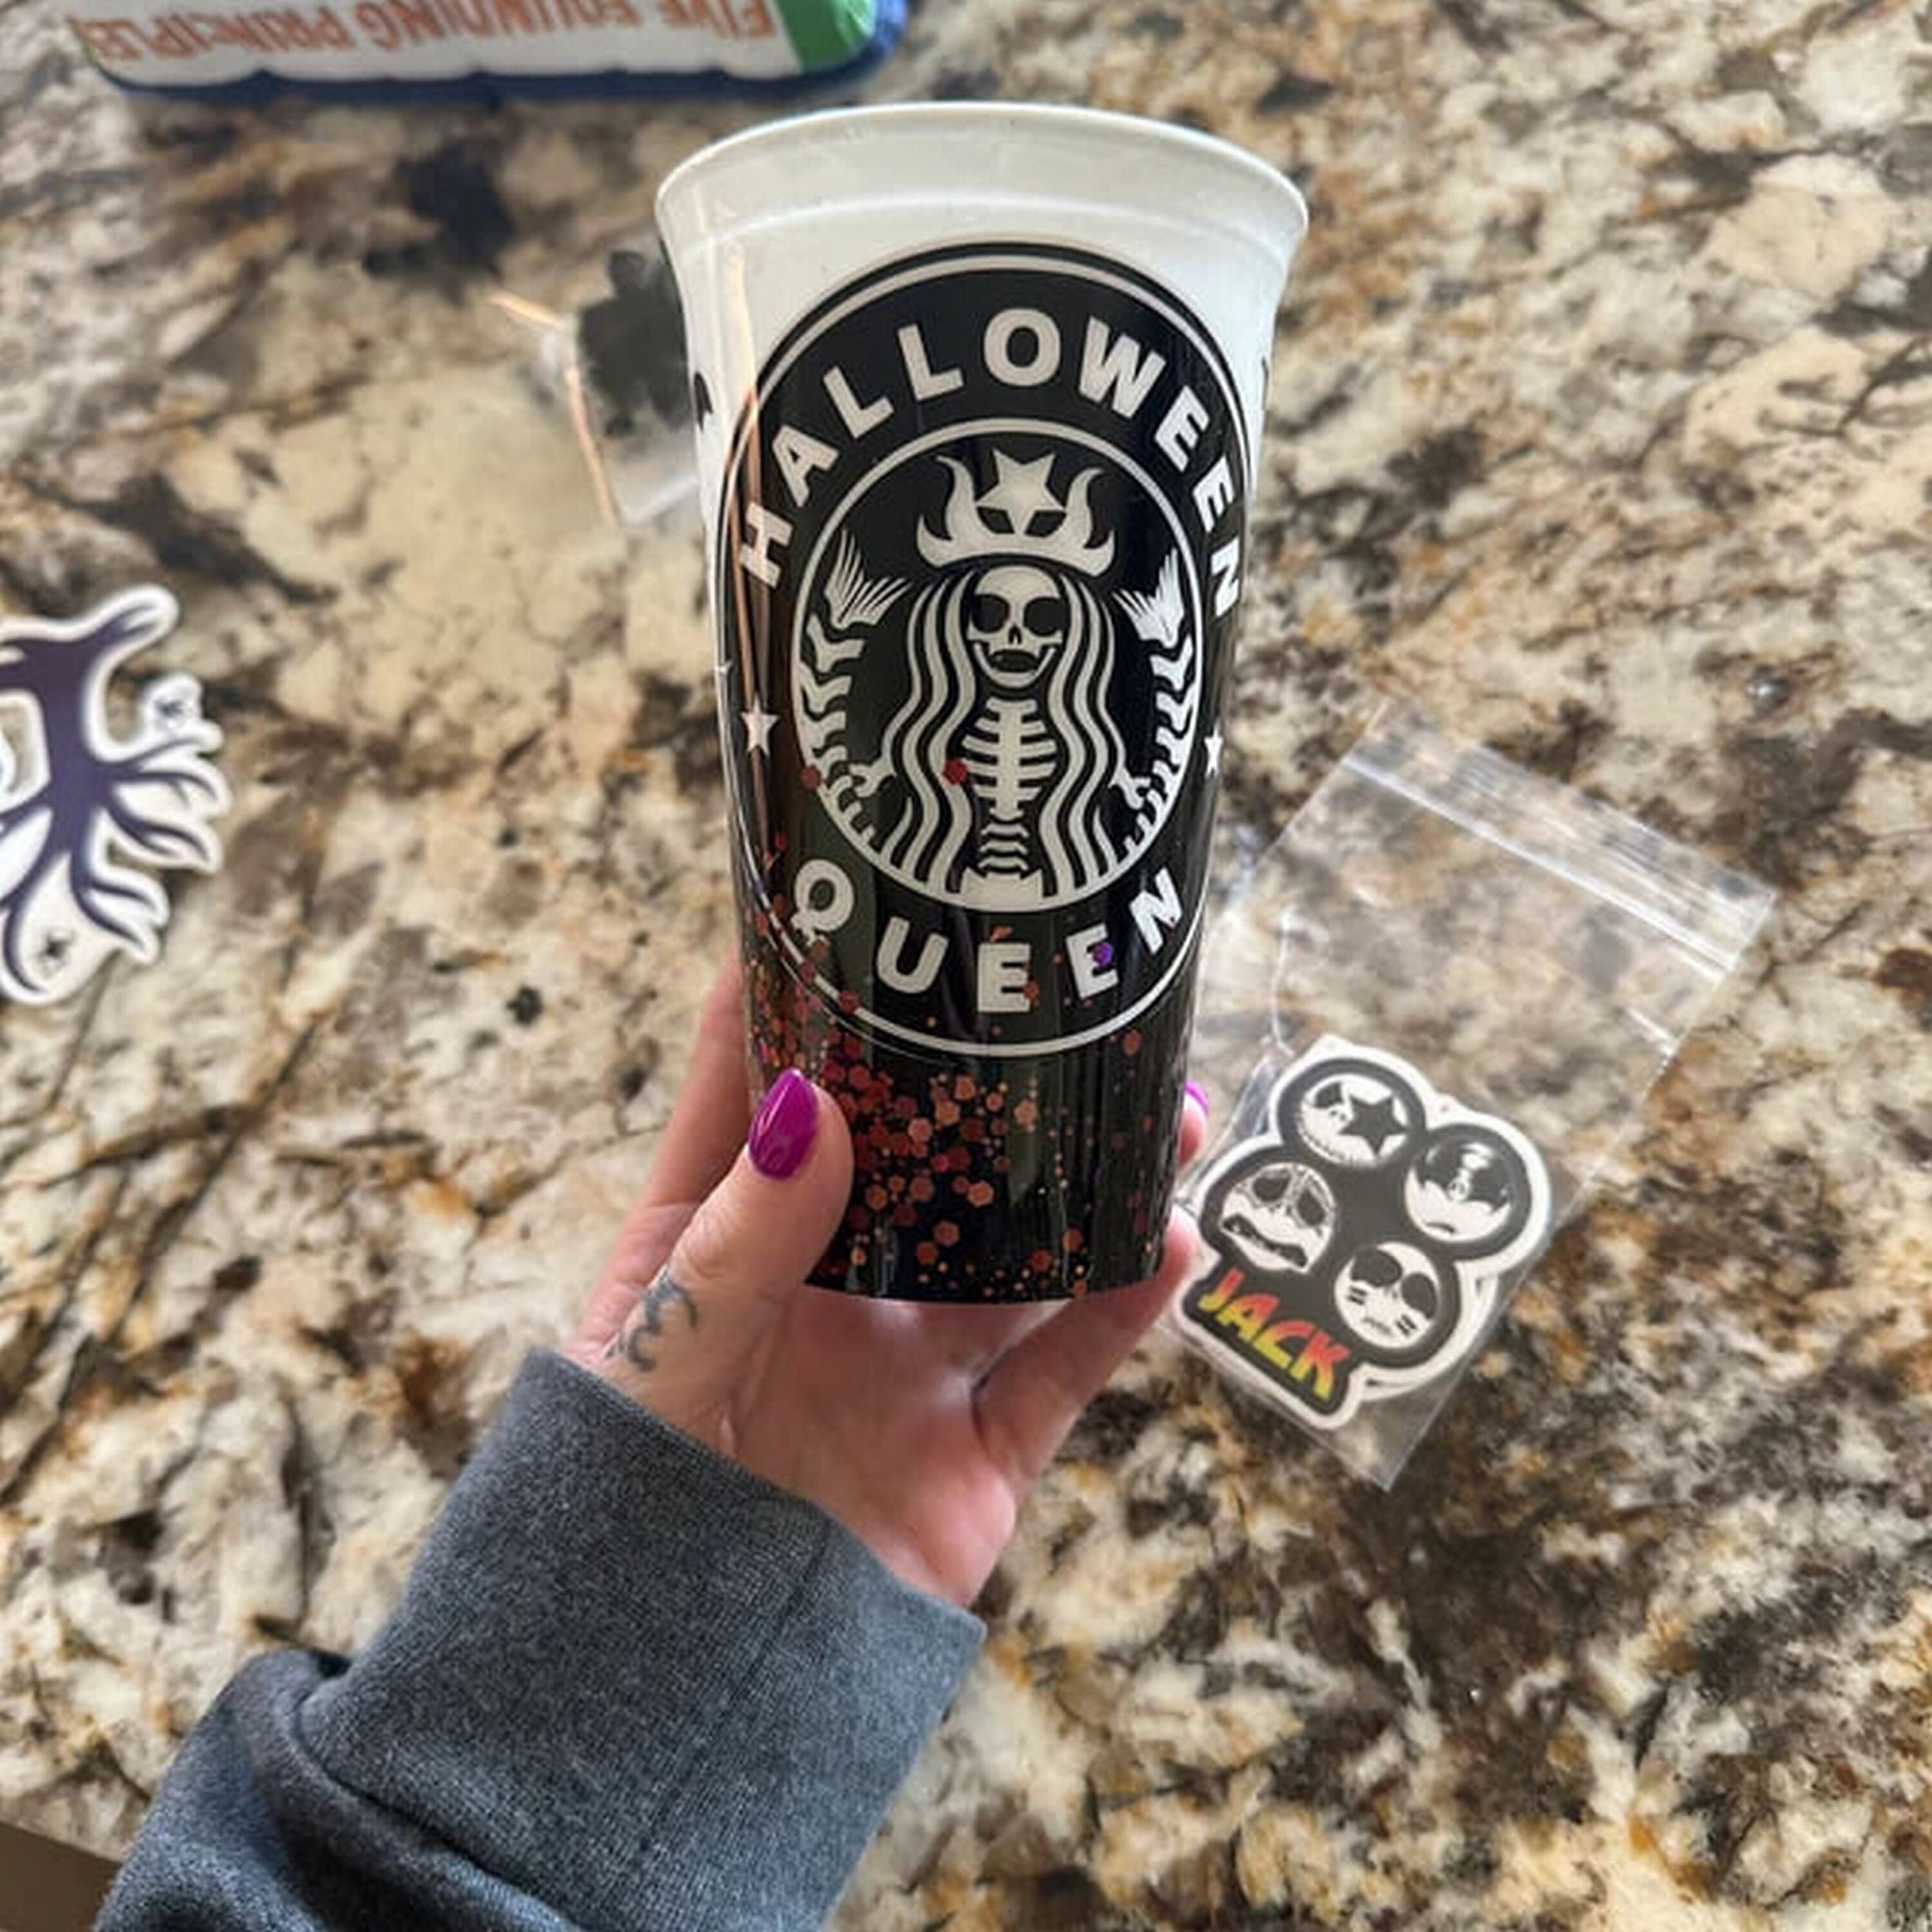 Starbucks cup Glow in the dark horror movie theme · Micheles Designs ·  Online Store Powered by Storenvy